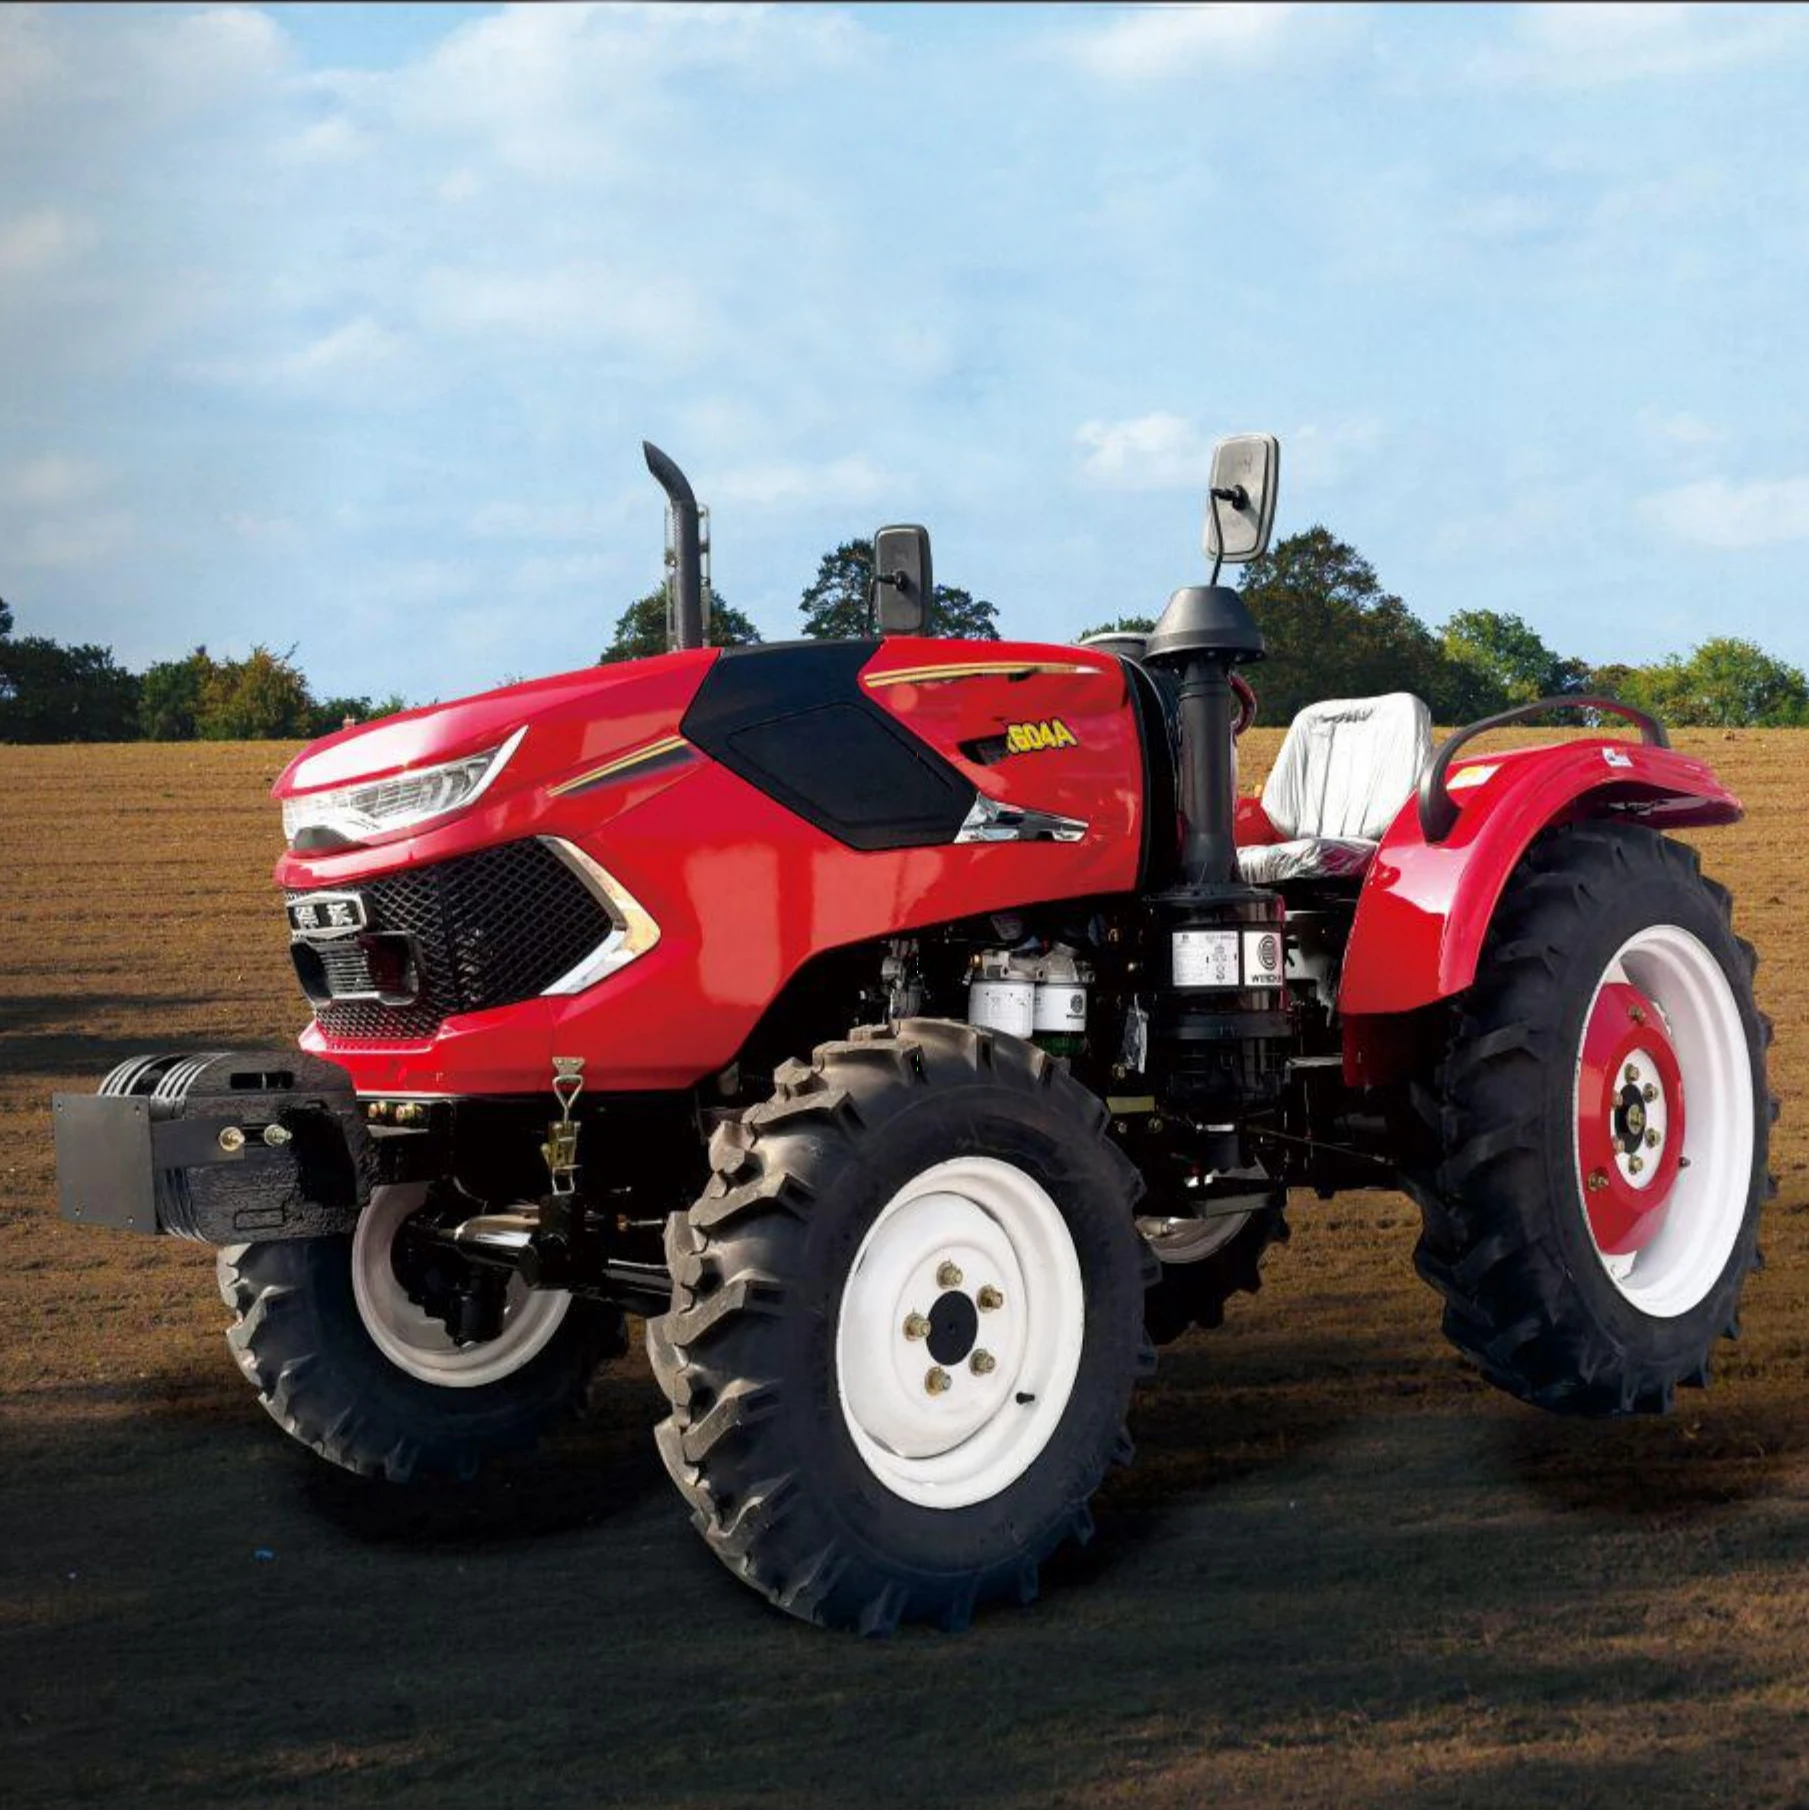 
Cheap 120 Power 4x4 Farm Tractor For Sale with auxiliary equipment 